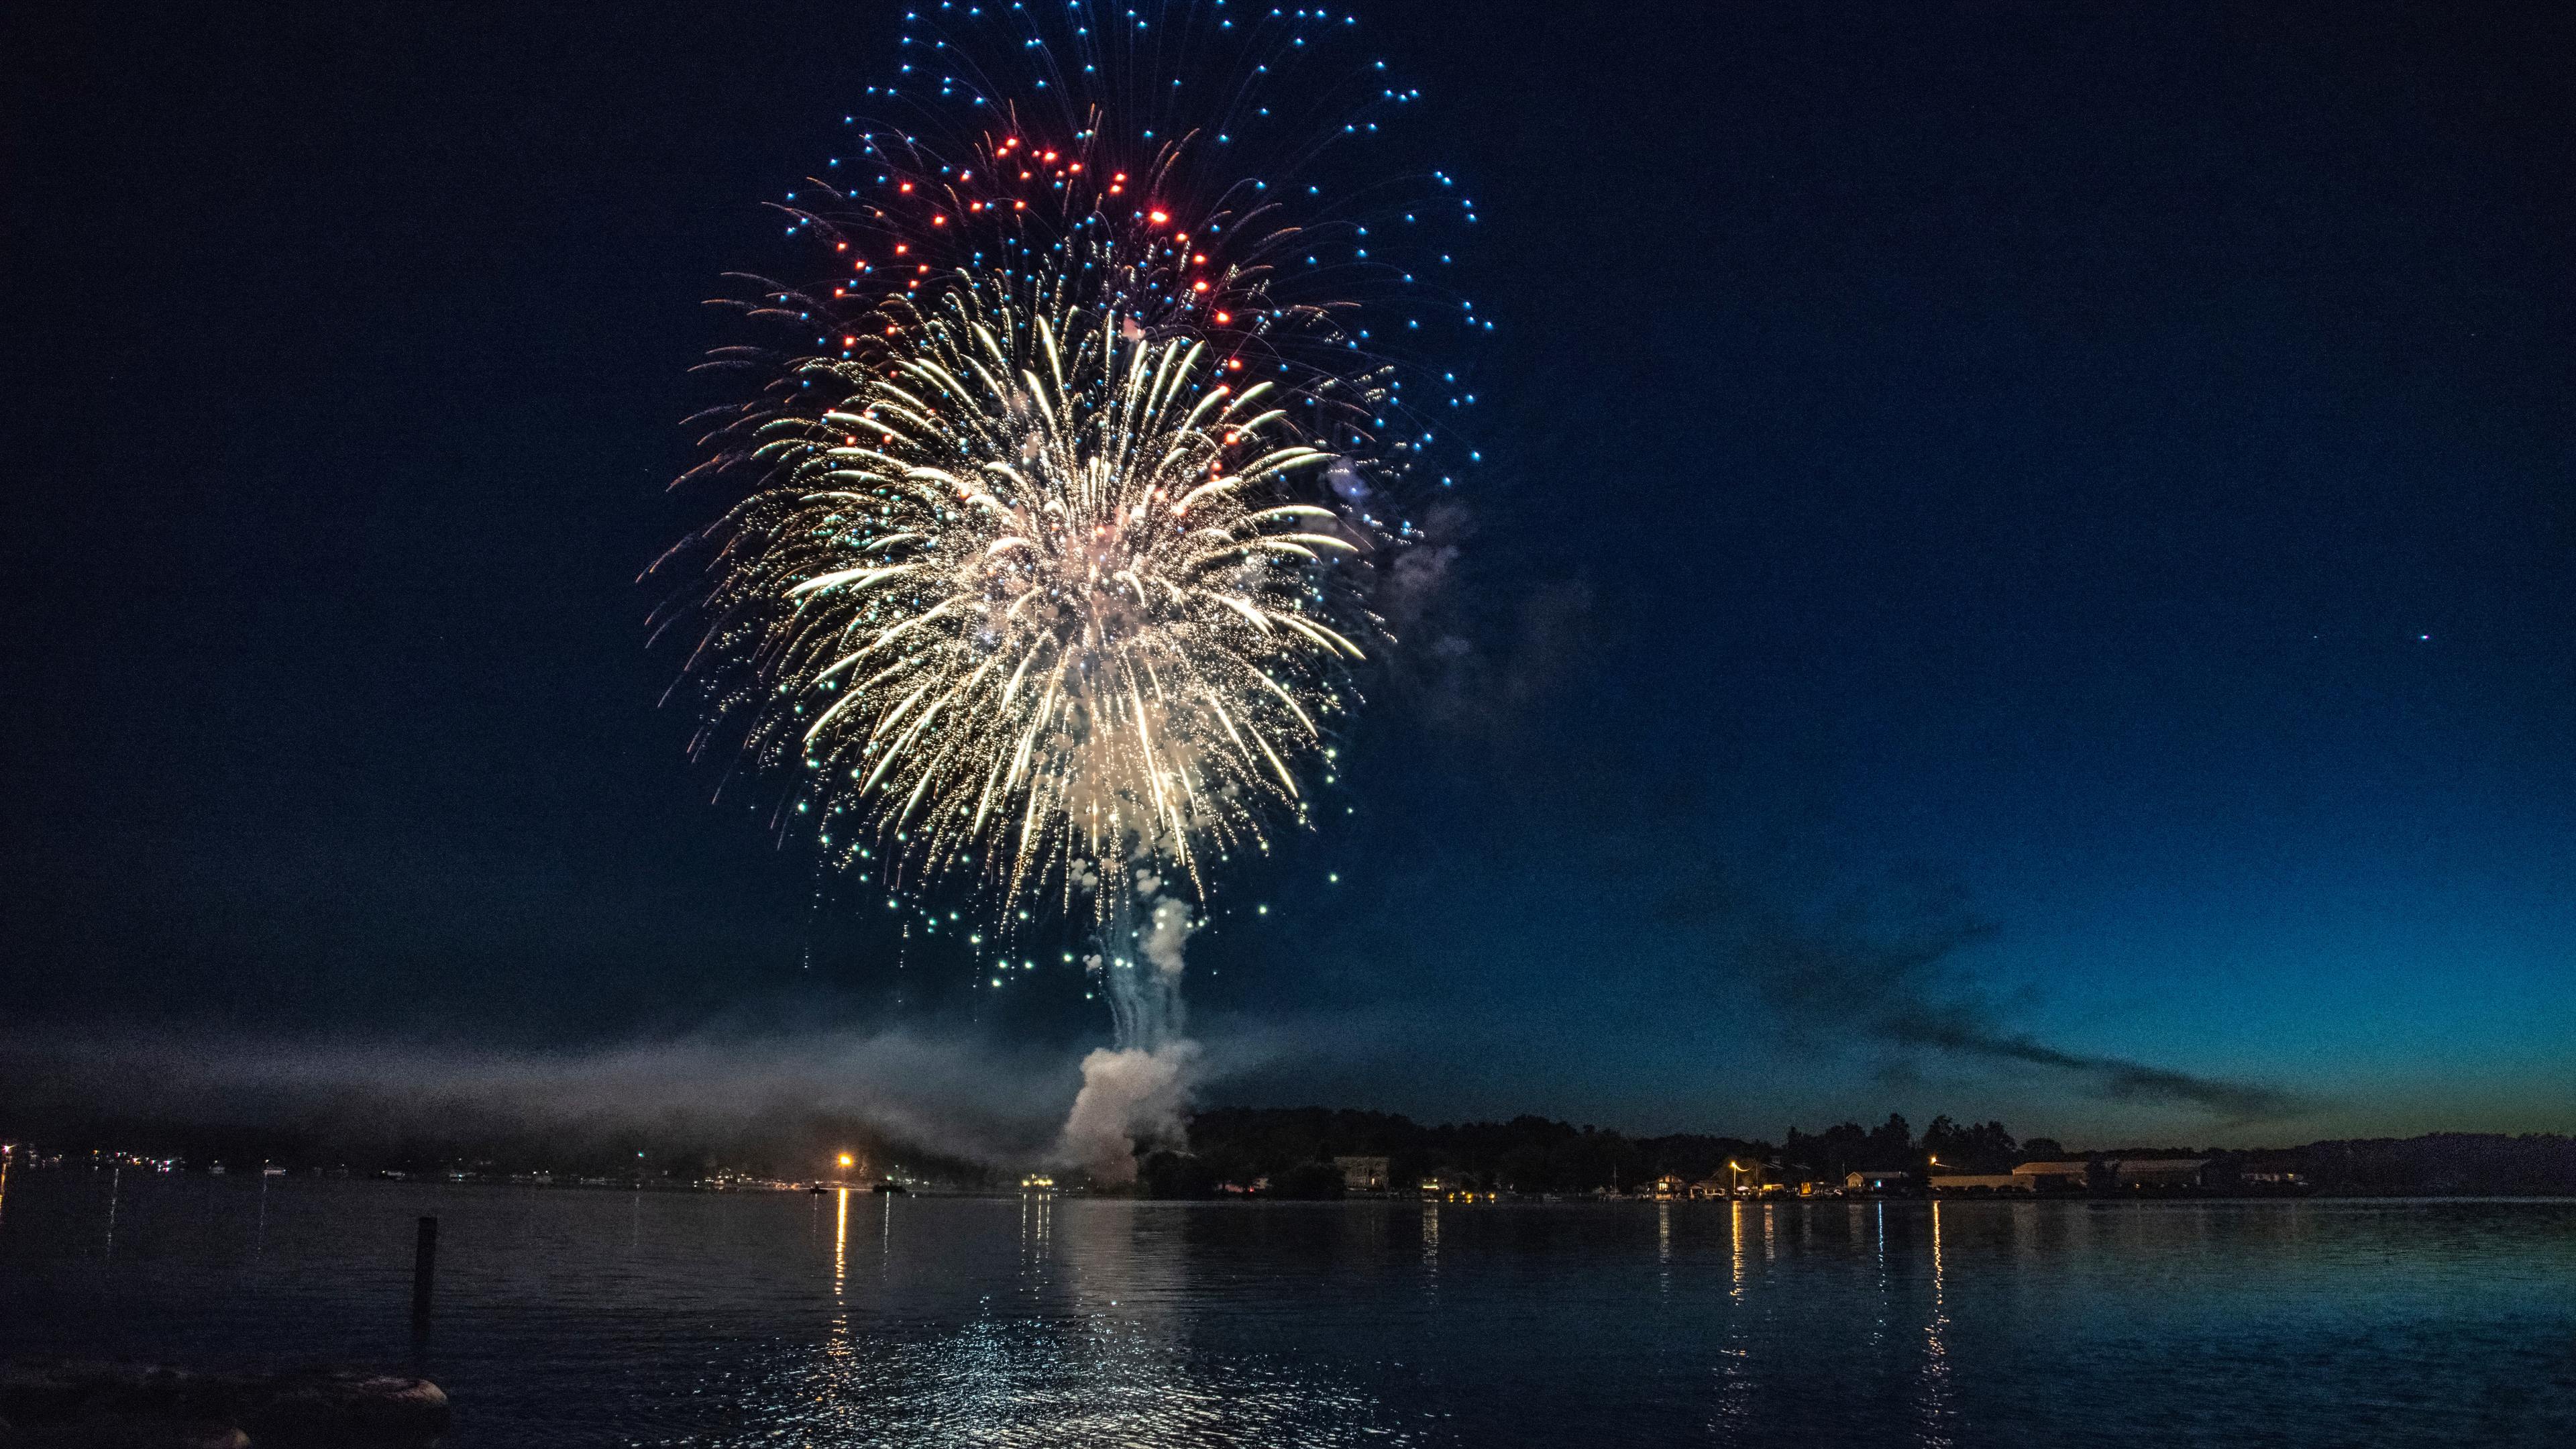 fireworks explosion above water body 4k 1540143366 - Fireworks Explosion Above Water Body 4k - photography wallpapers, hd-wallpapers, fireworks wallpapers, 8k wallpapers, 5k wallpapers, 4k-wallpapers